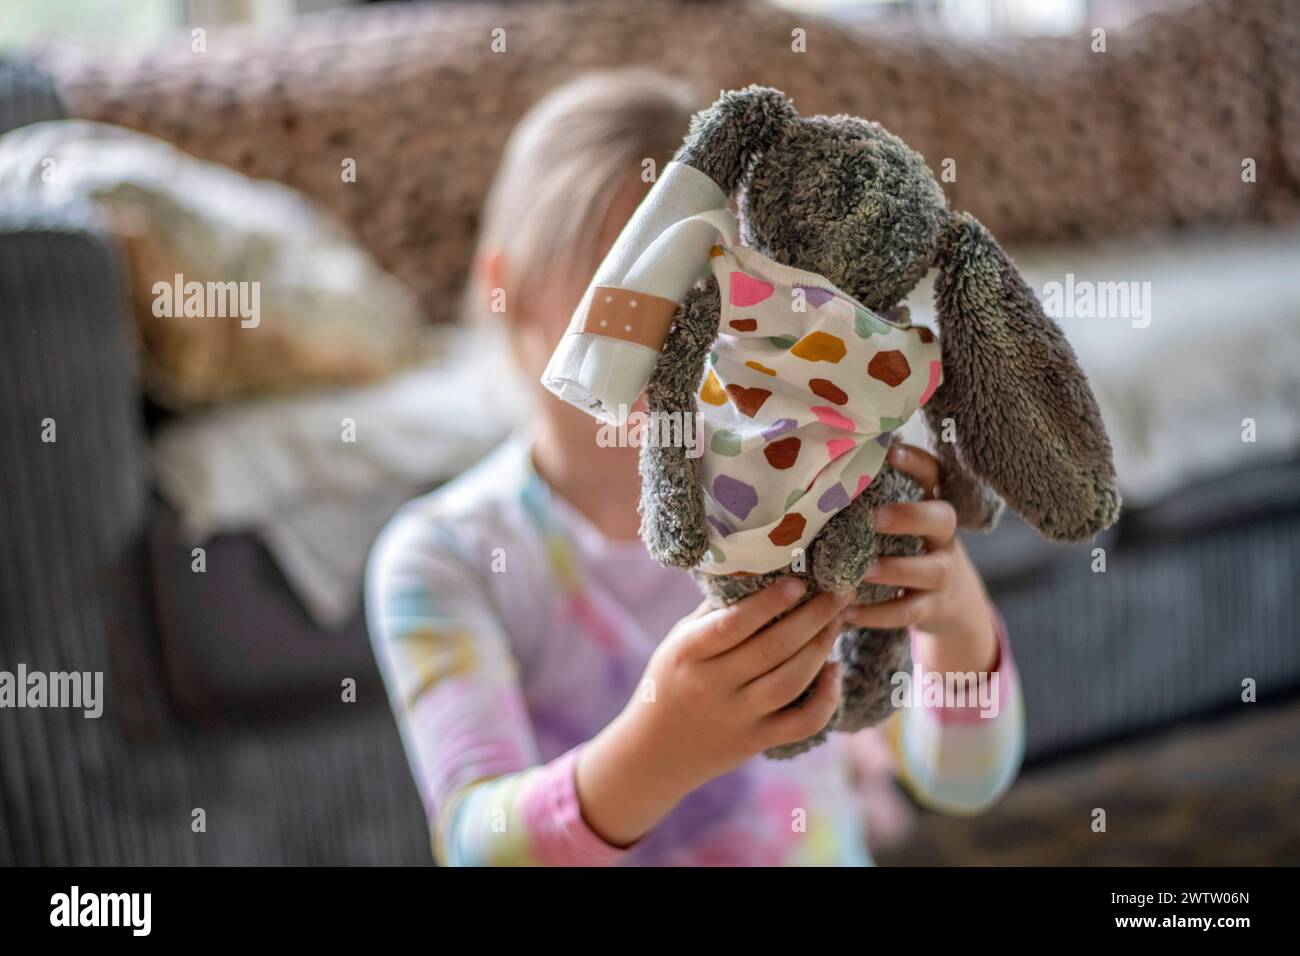 Child having a playful moment with a stuffed animal. Stock Photo